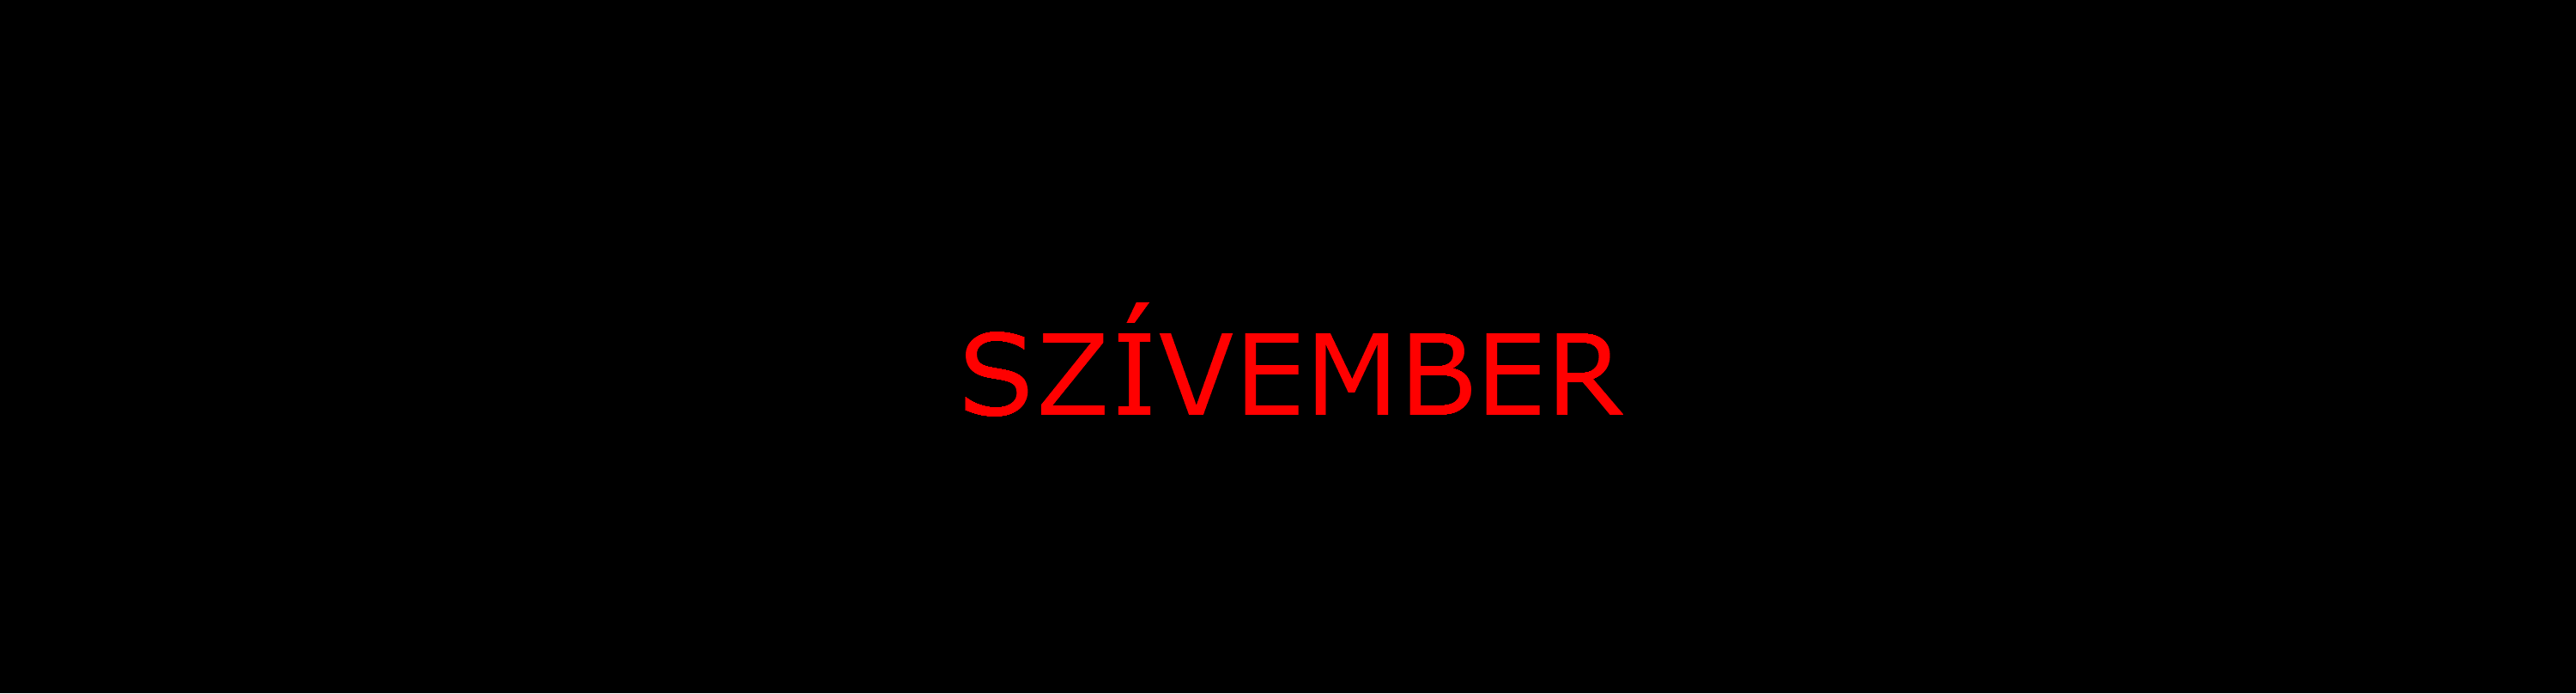 szivember.png